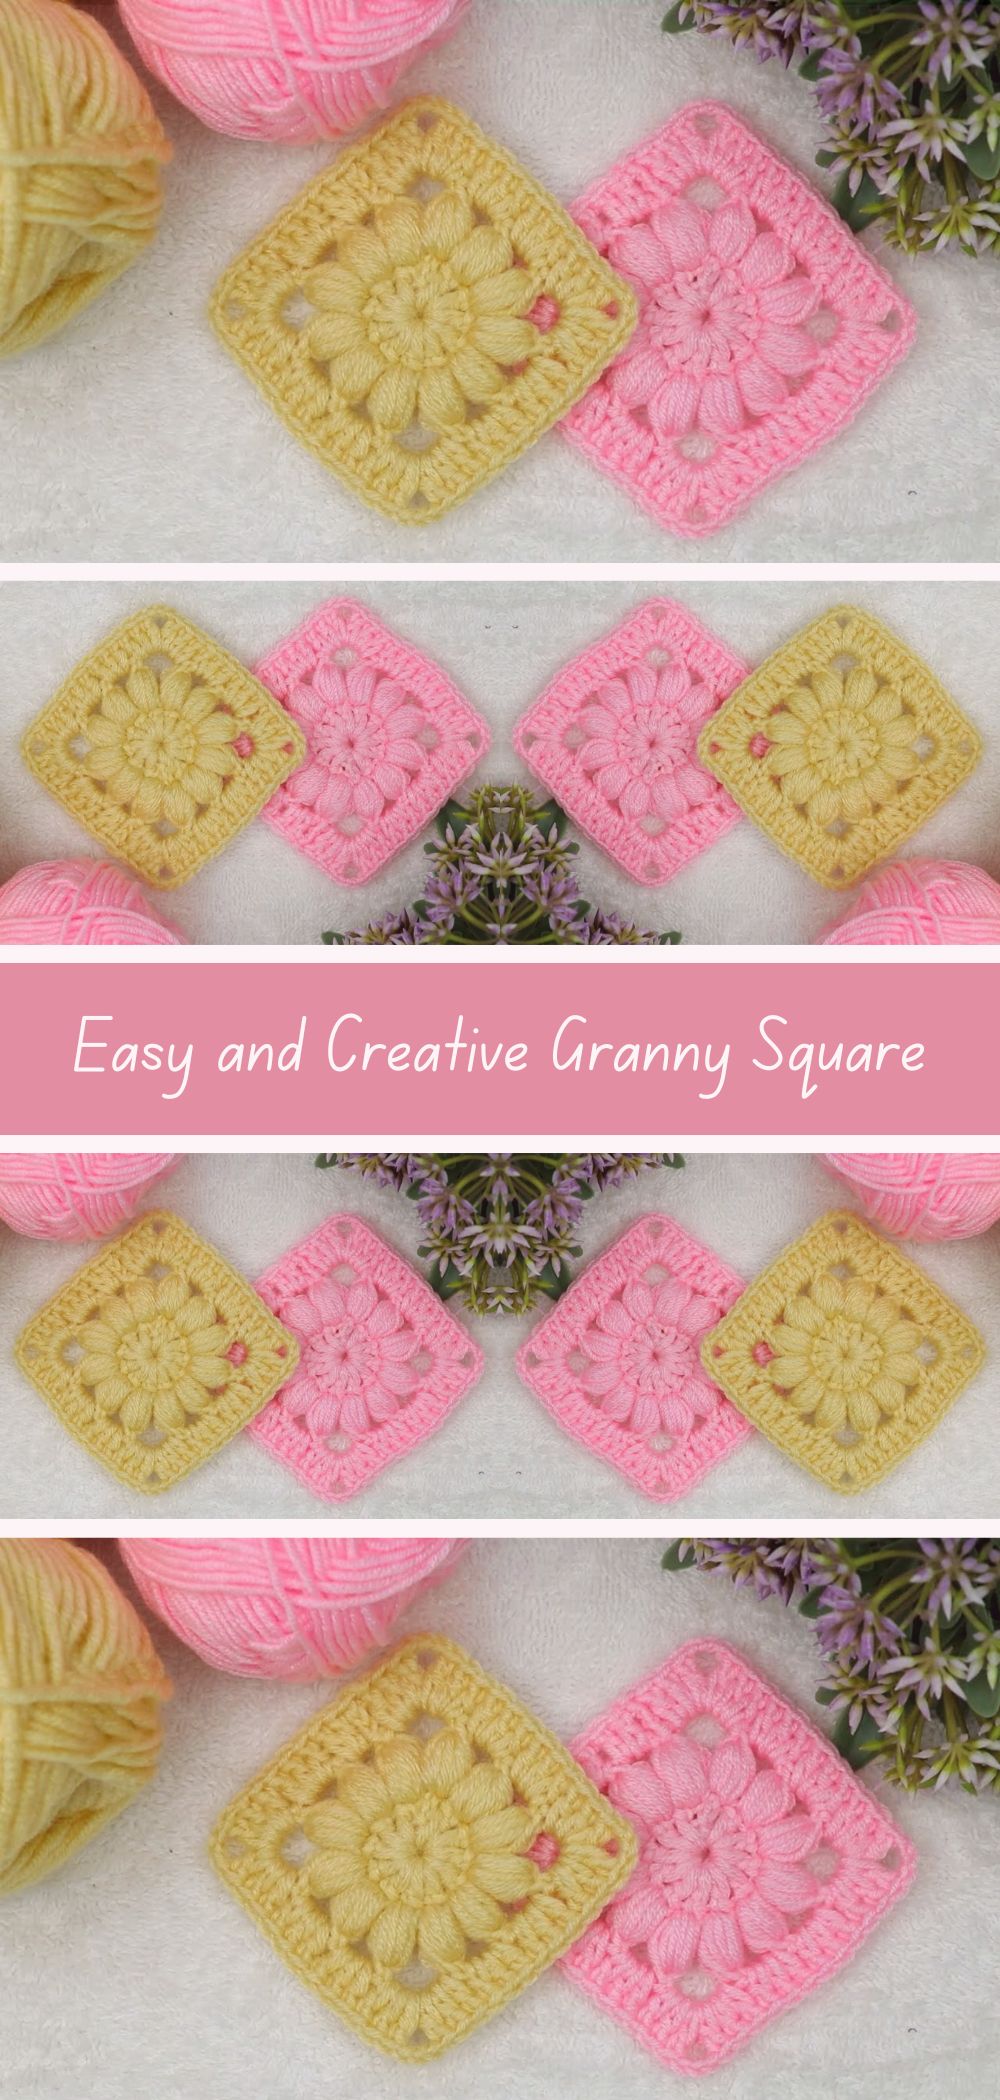 Easy and Creative Granny Square Crochet Pattern - Unlock your creativity with this versatile crochet design